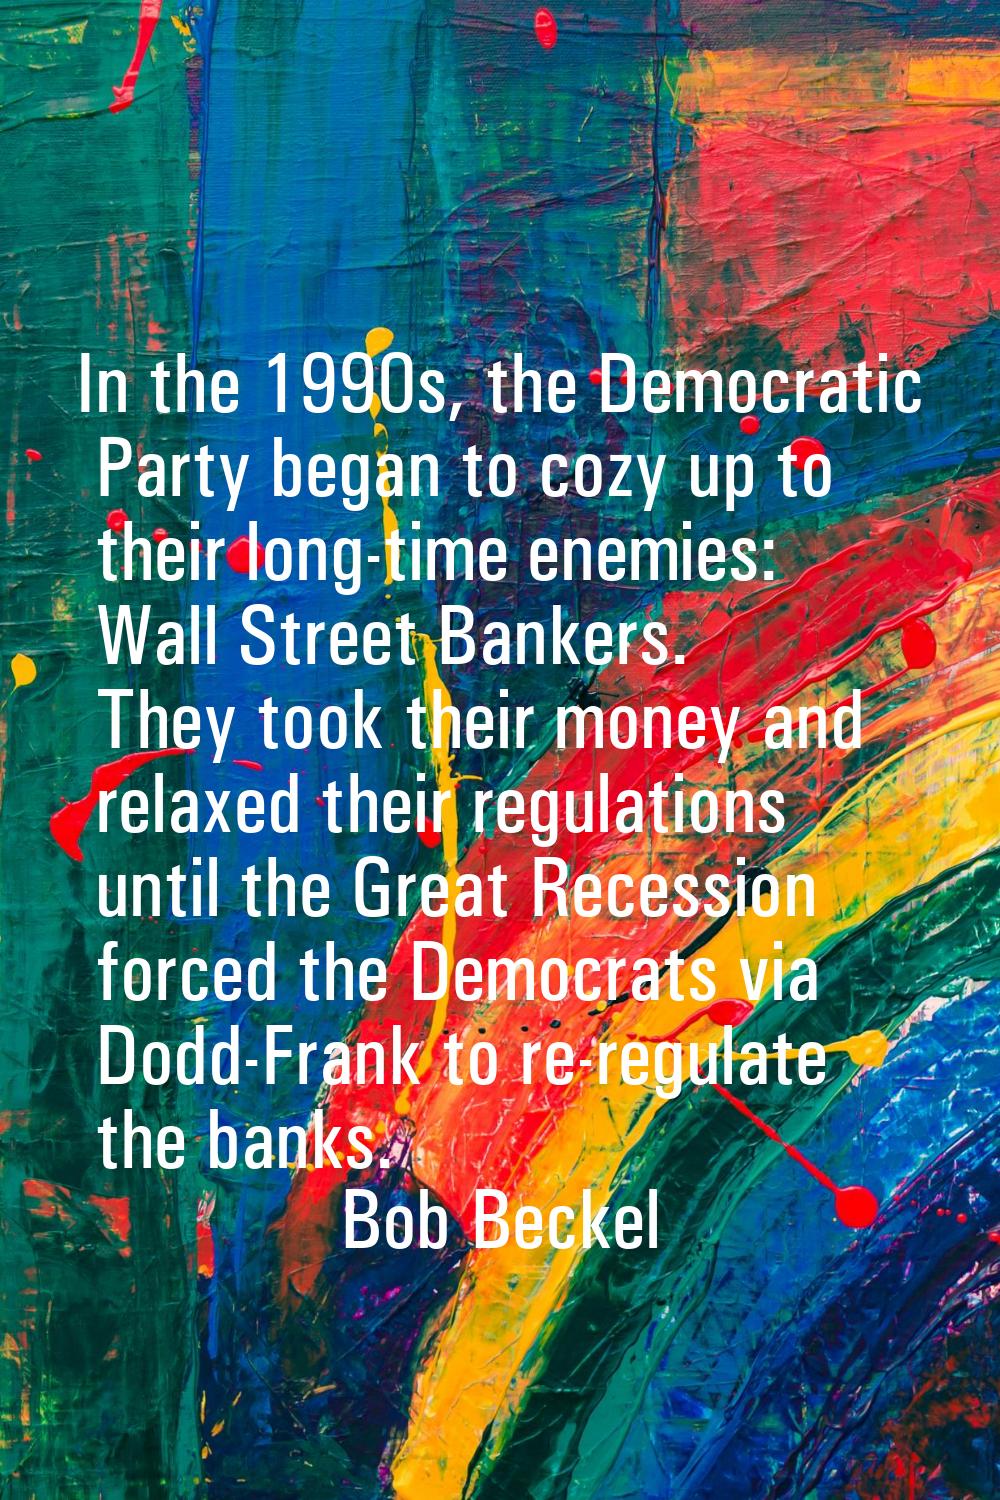 In the 1990s, the Democratic Party began to cozy up to their long-time enemies: Wall Street Bankers